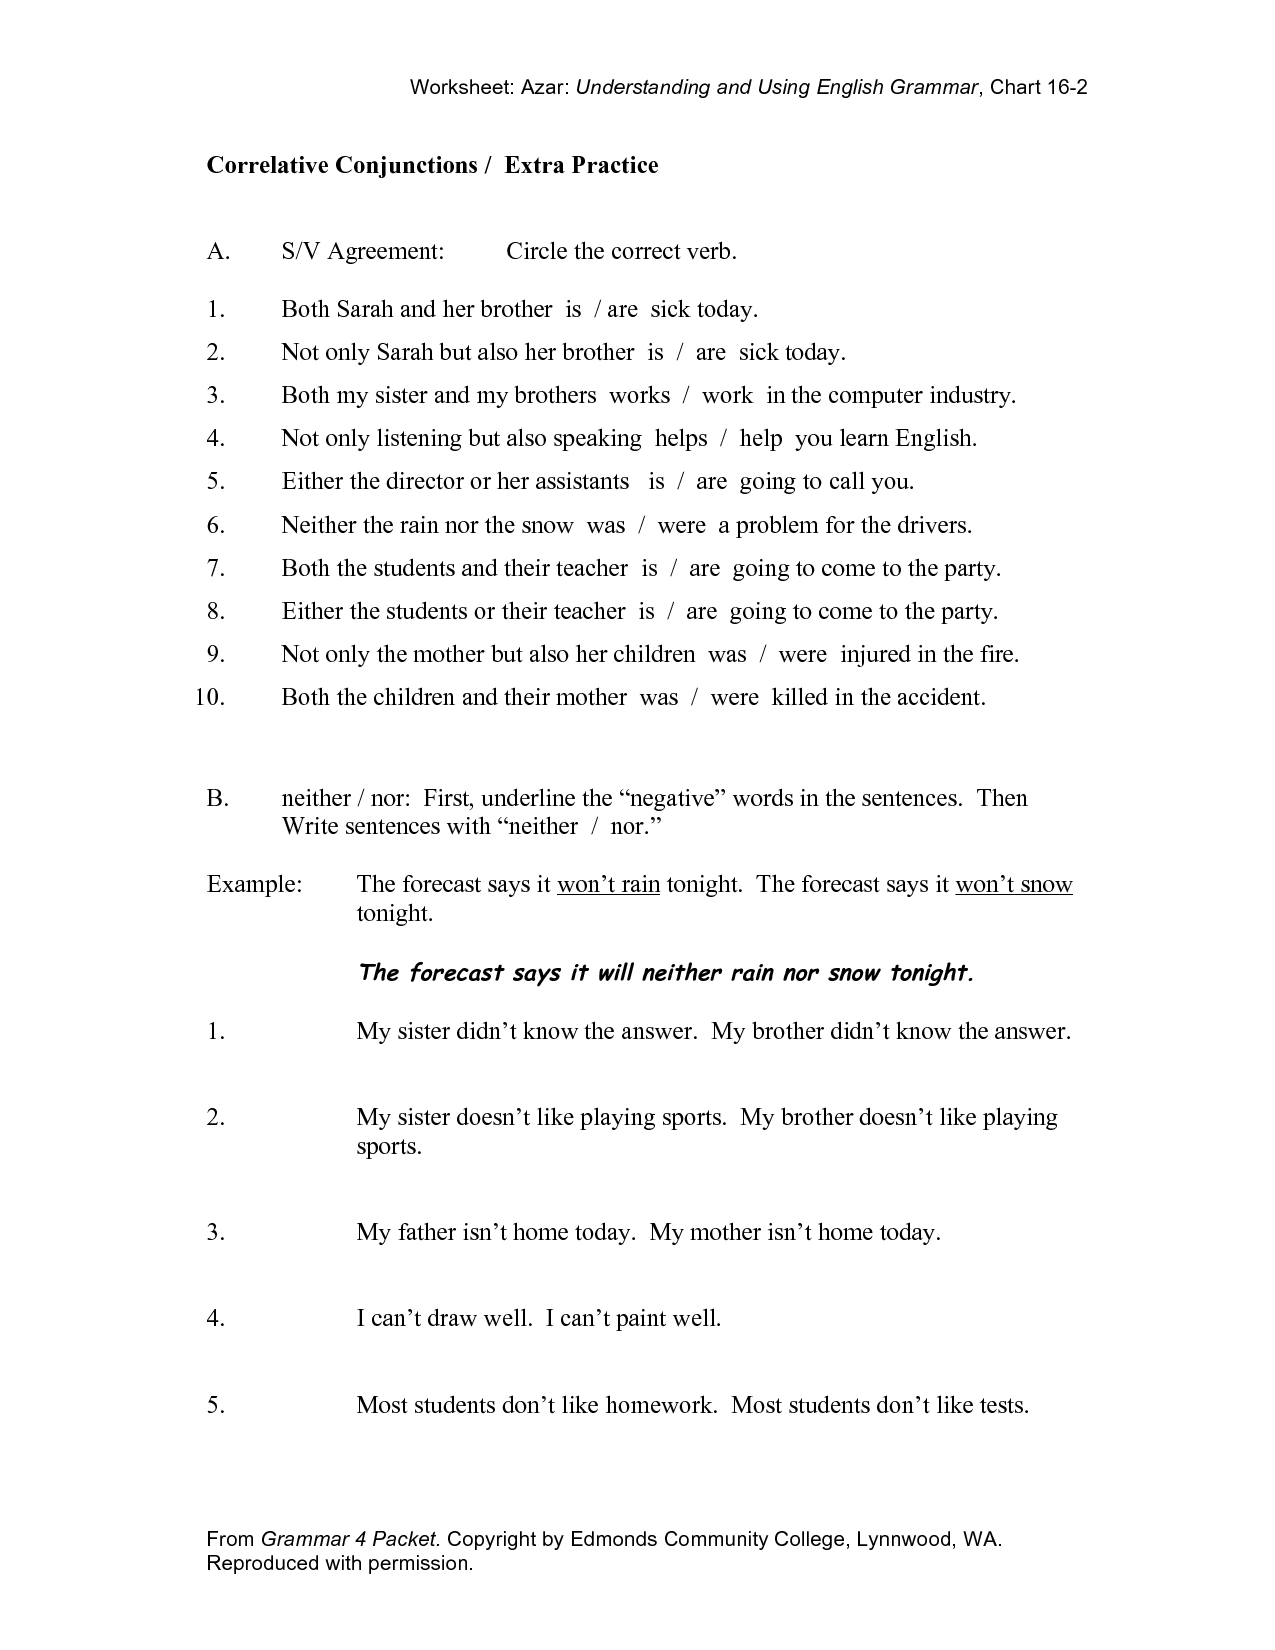 15 Best Images Of Worksheets Using Conjunctions Subordinating Conjunctions Worksheets